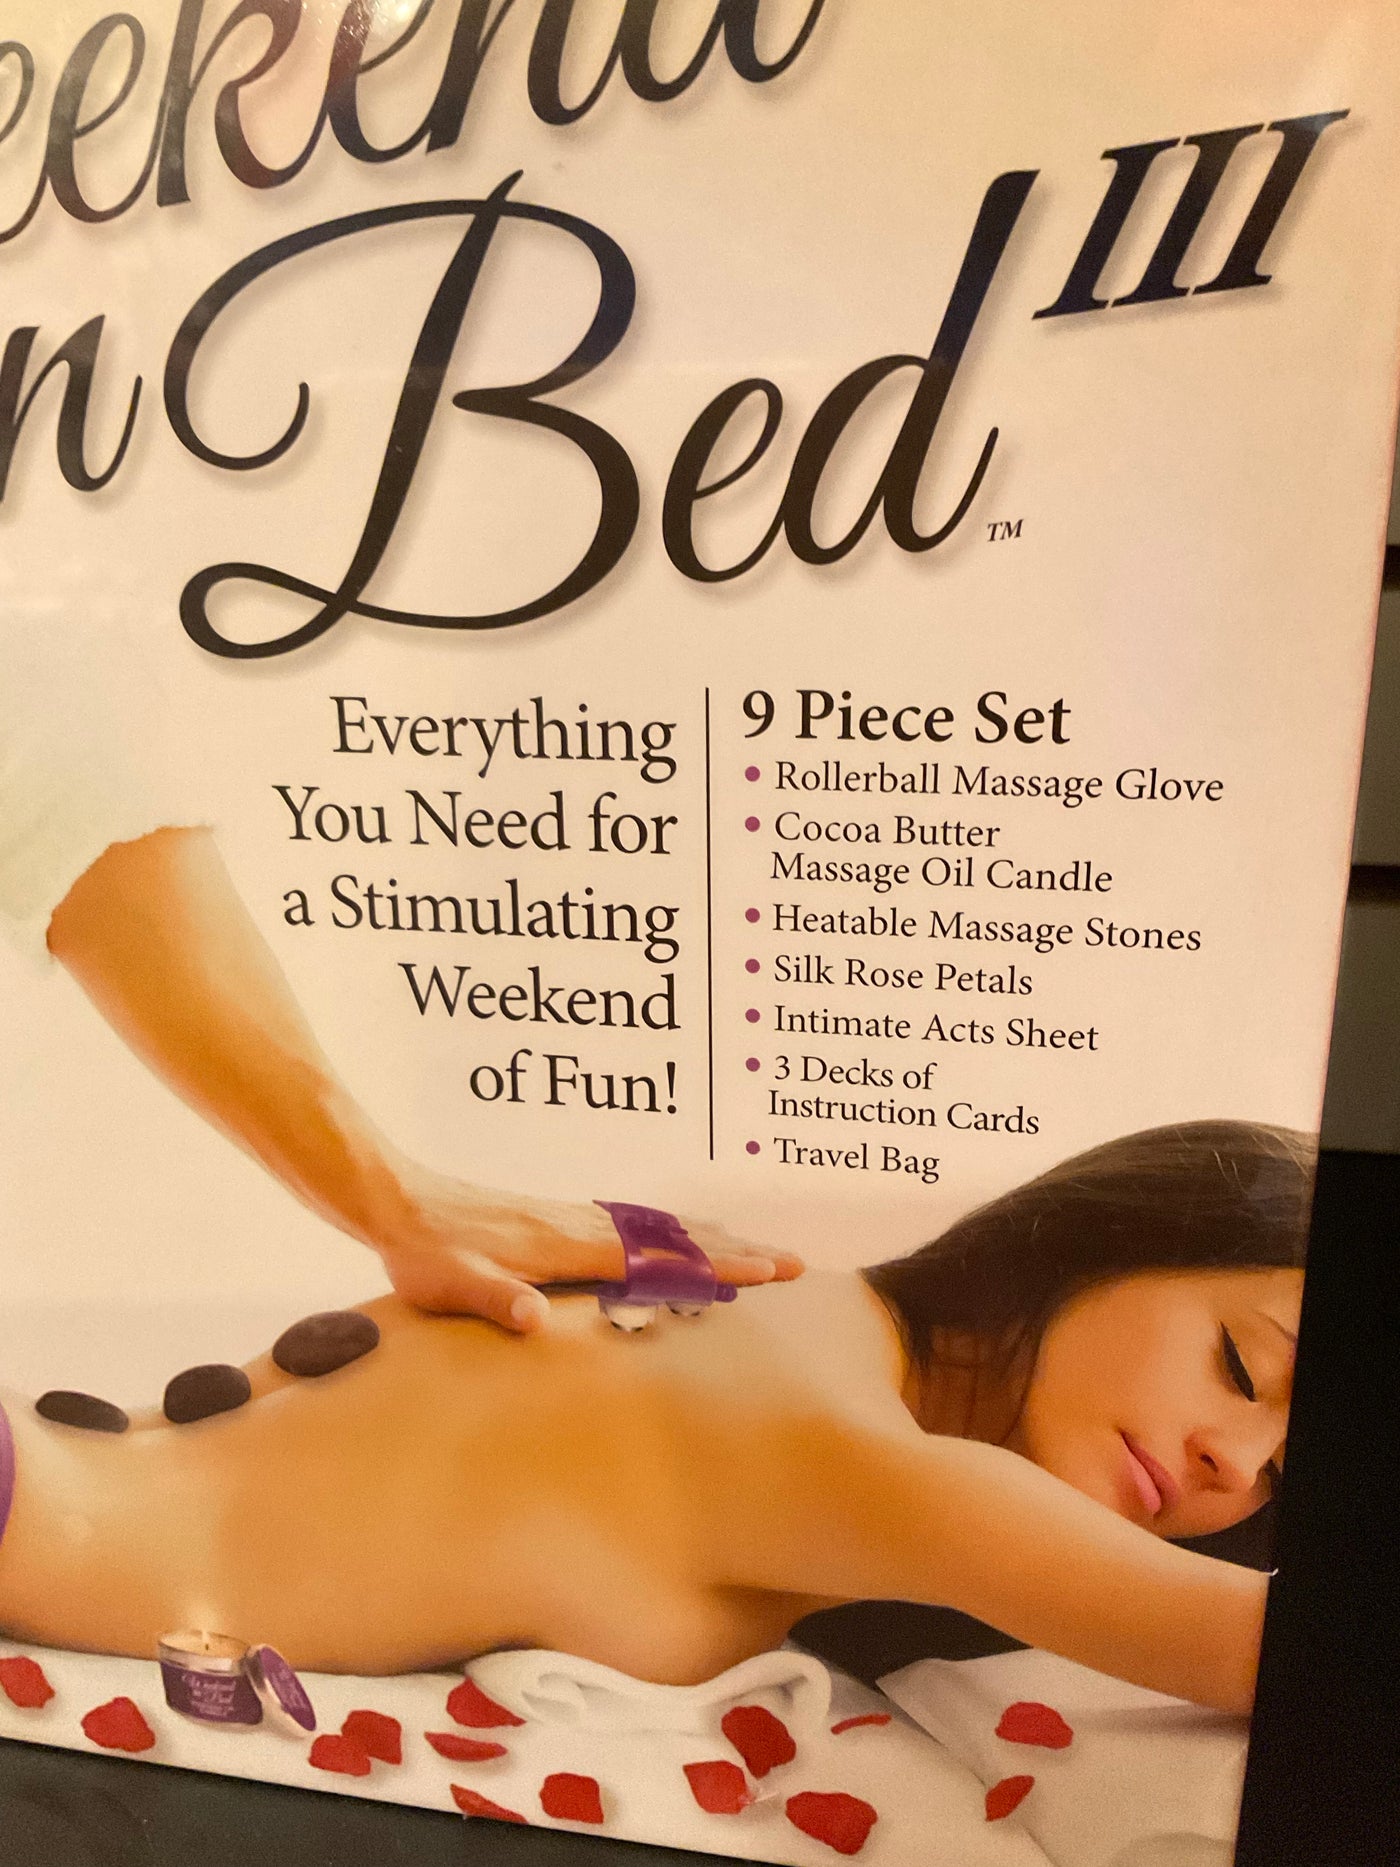 Weekend in Bed Tantric Massage Kit